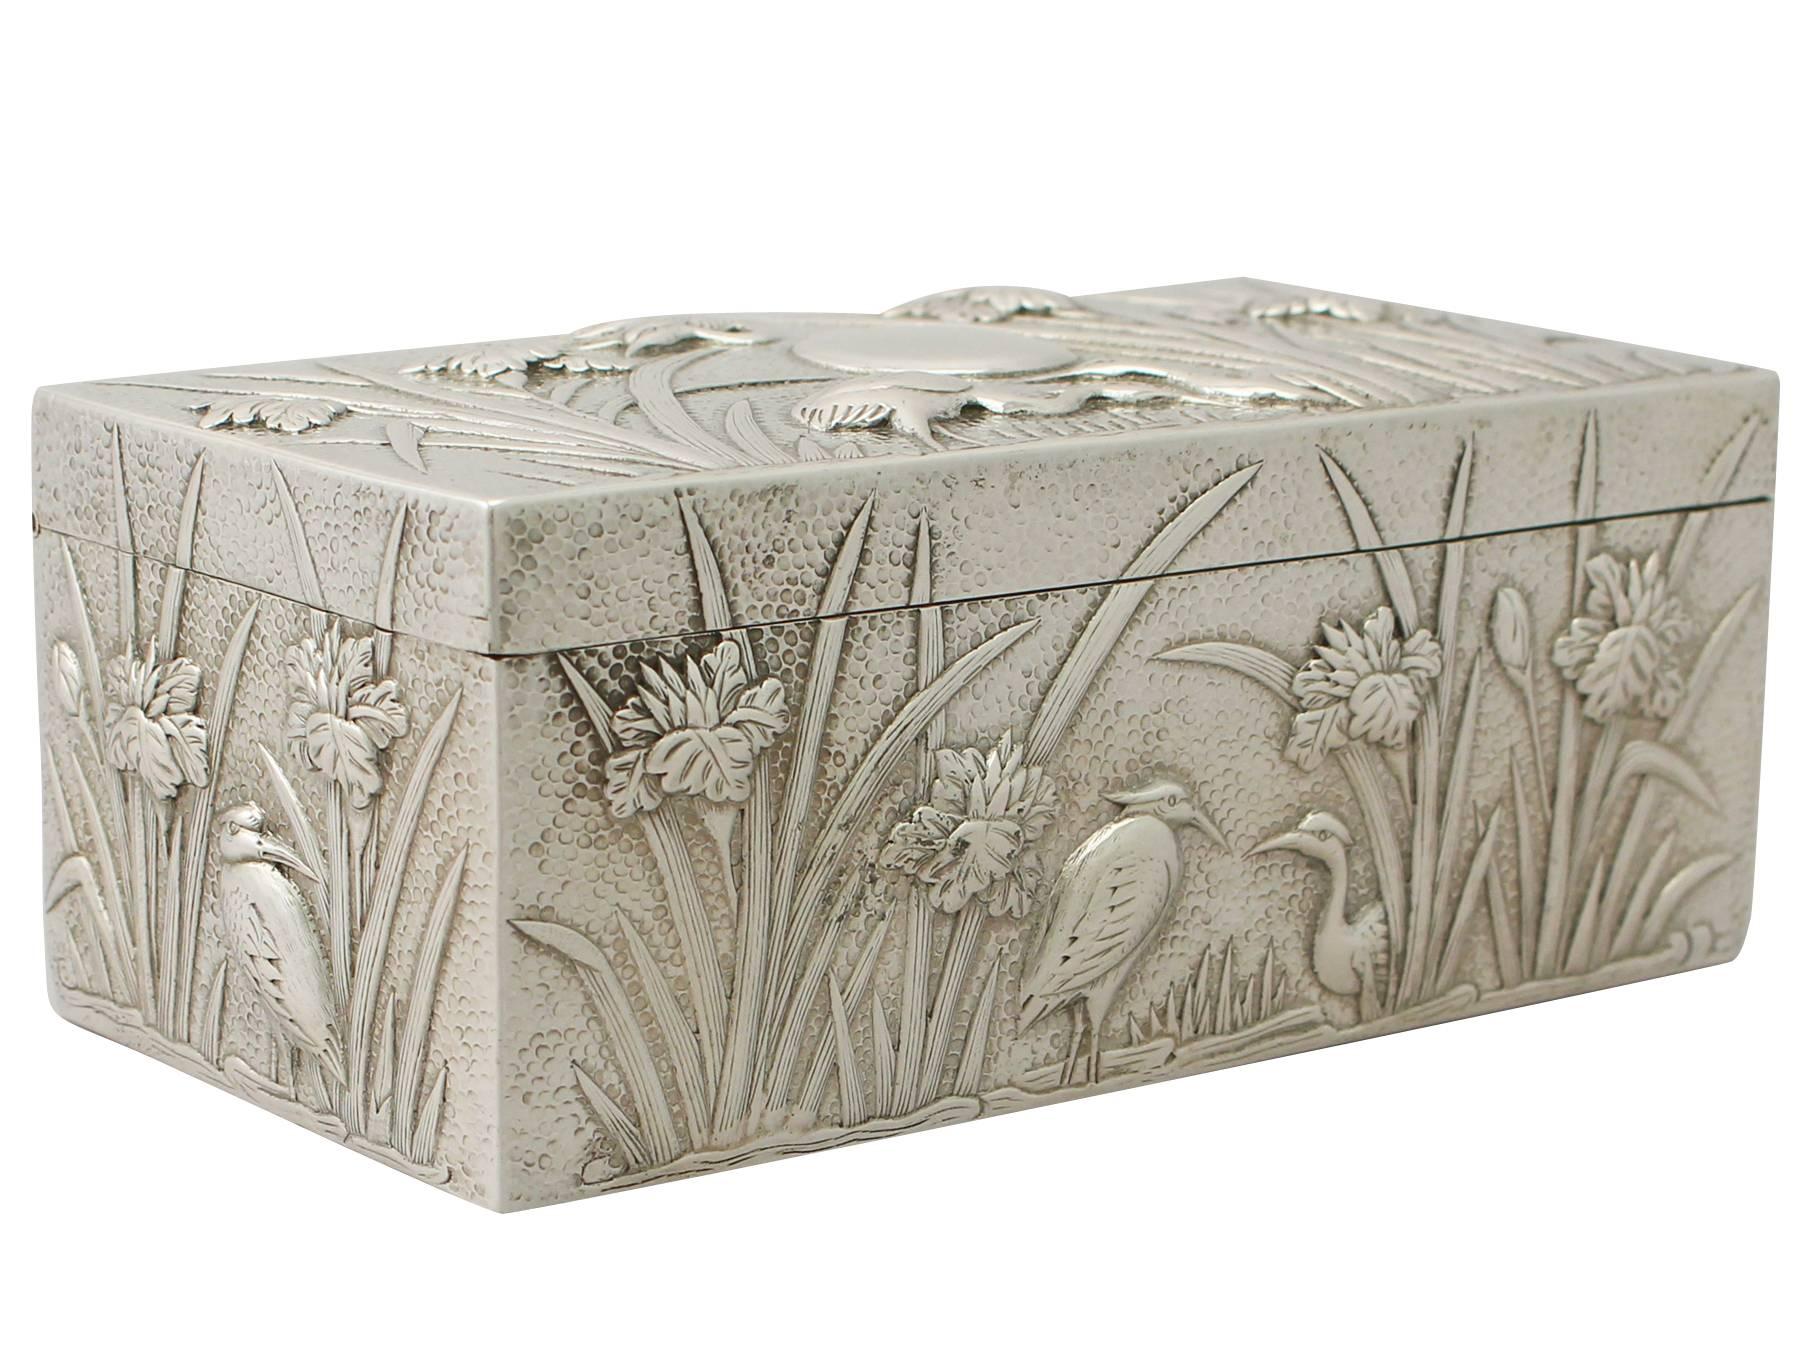 Other Chinese Export Silver Box - Antique Circa 1900